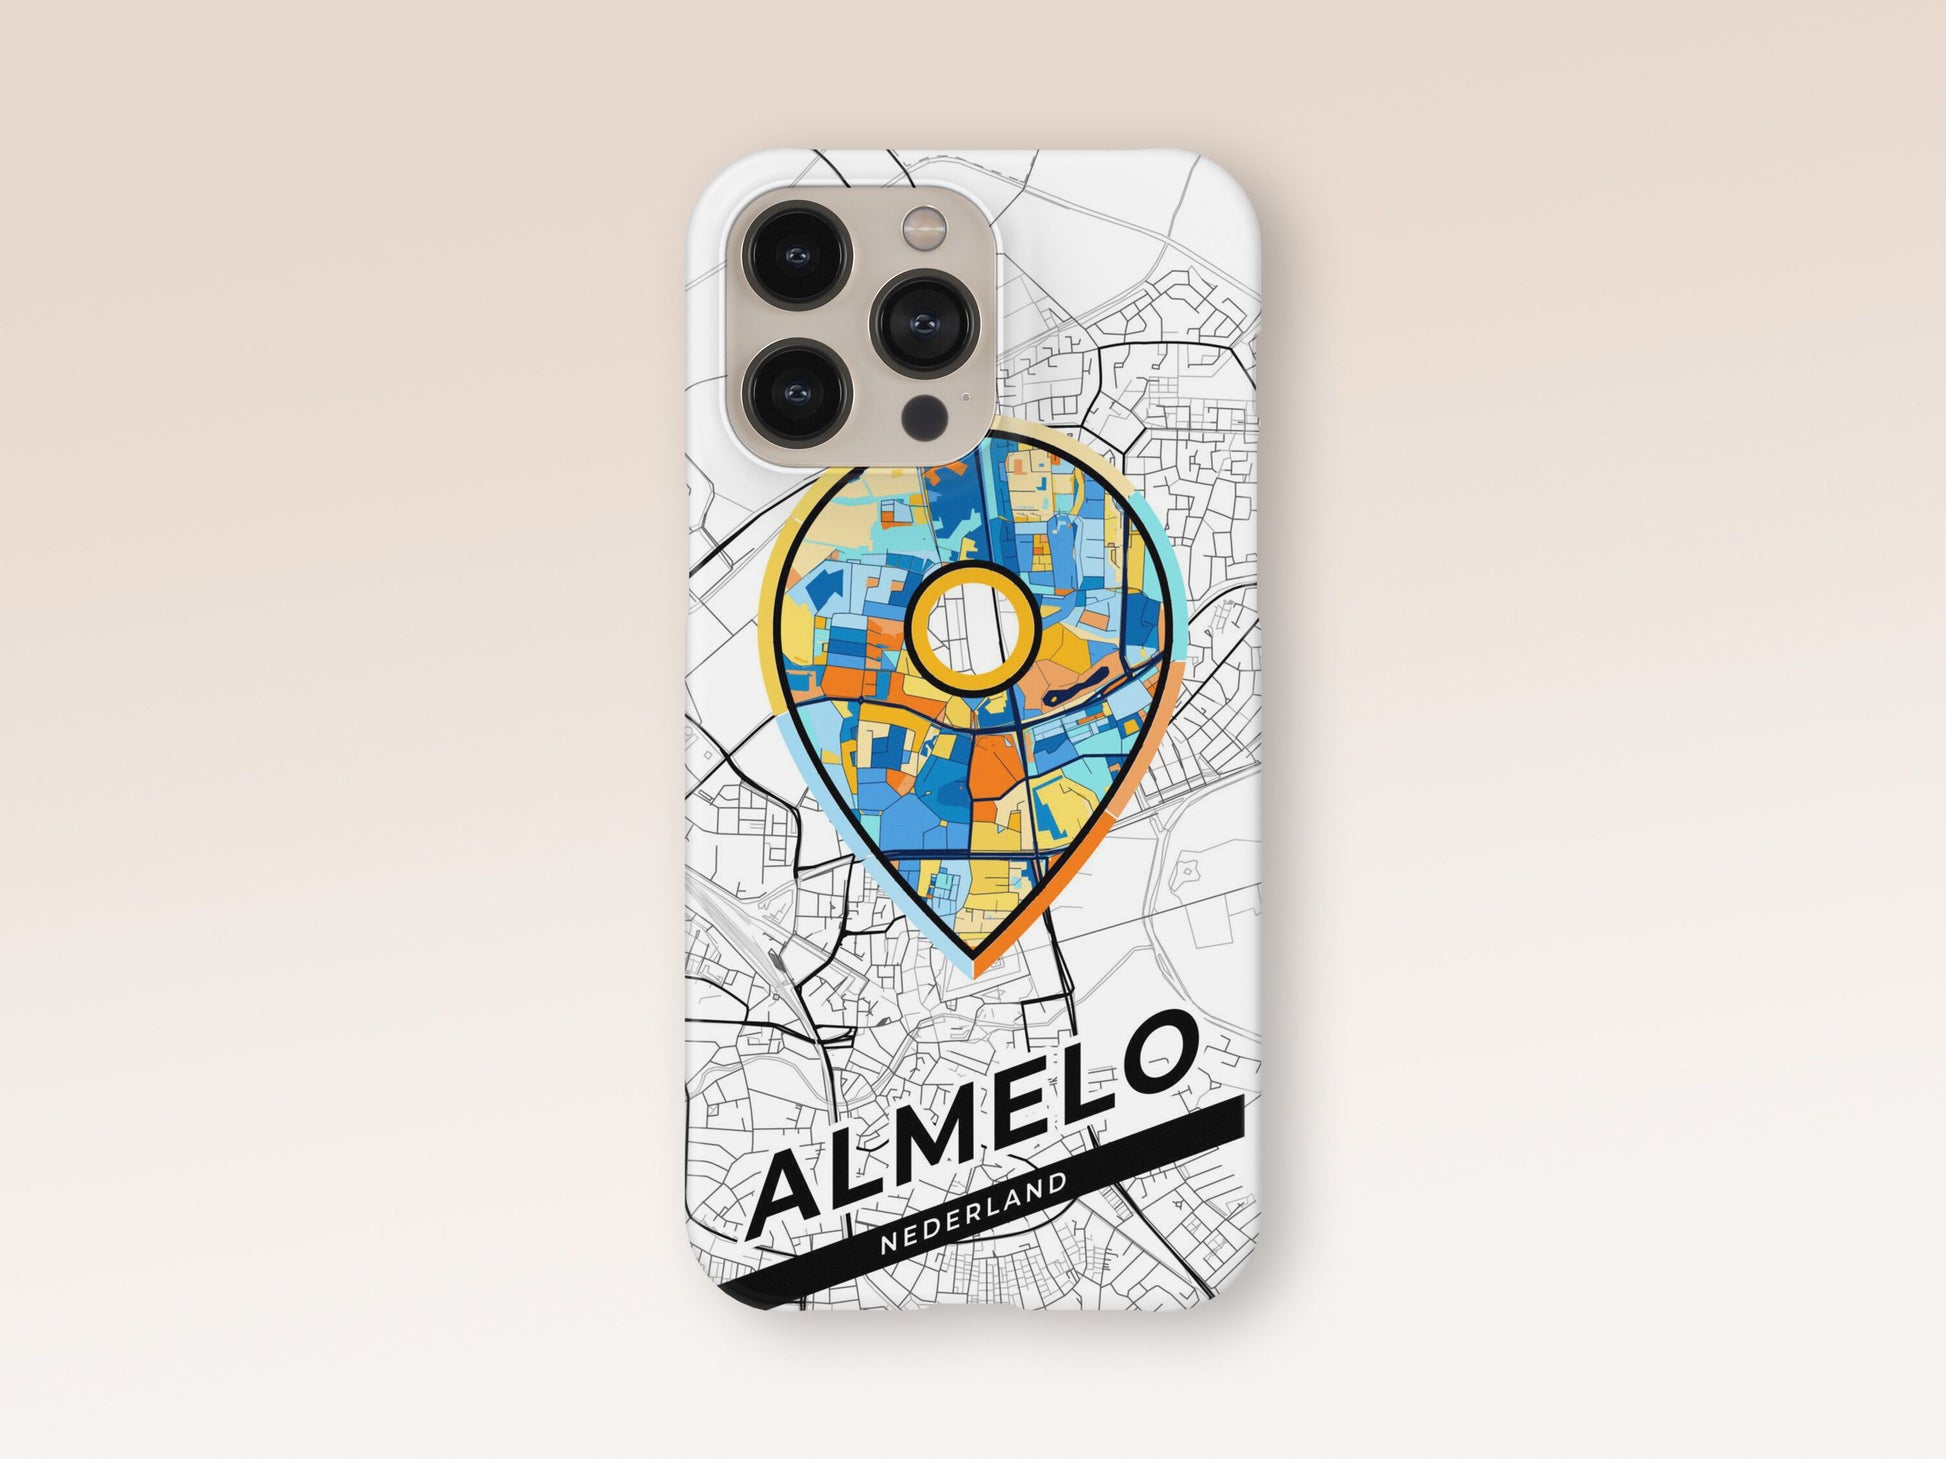 Almelo Netherlands slim phone case with colorful icon. Birthday, wedding or housewarming gift. Couple match cases. 1